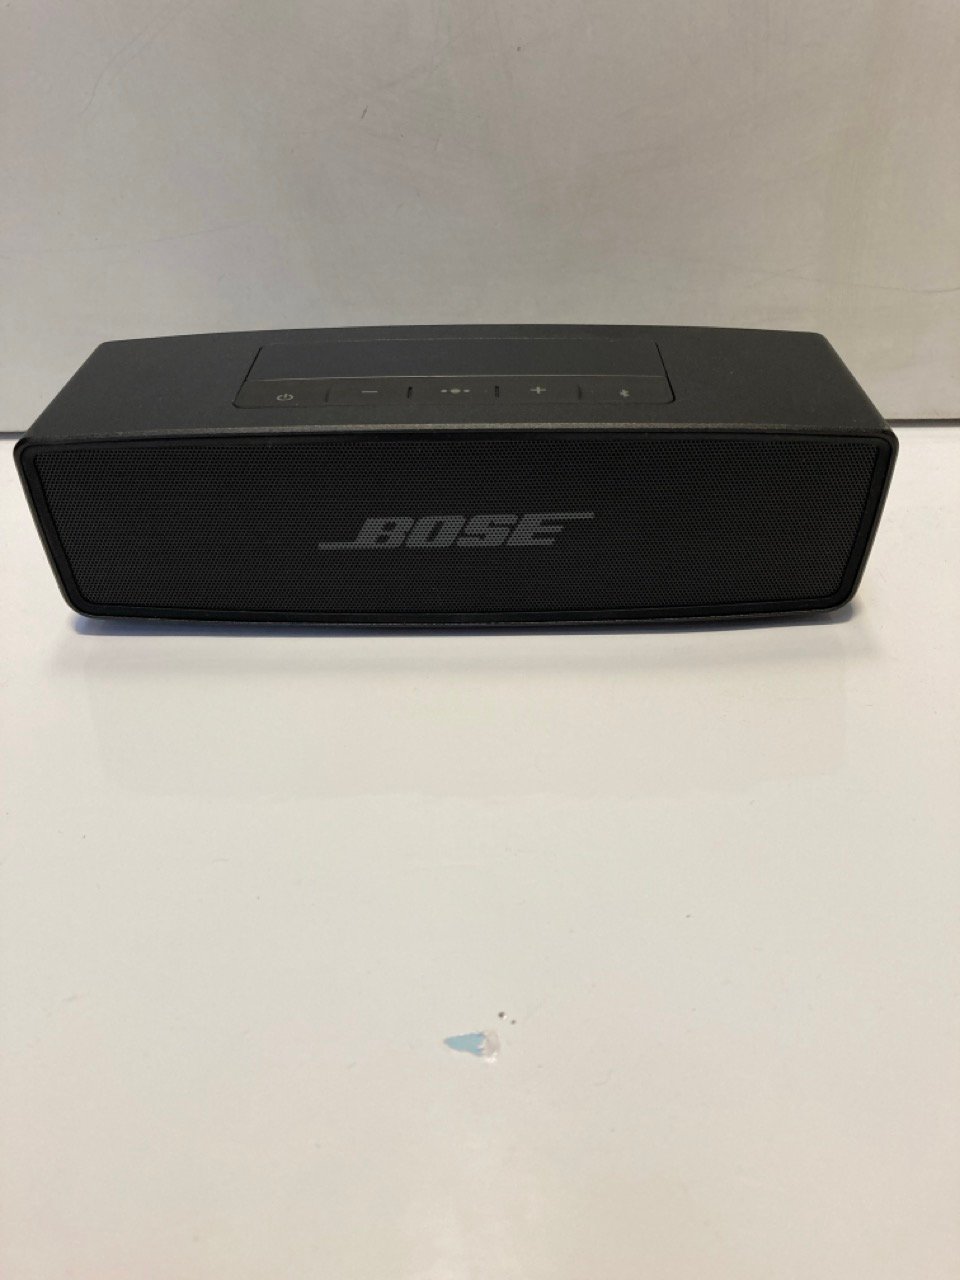 A BOSE SOUNDLINK MINI II, BLACK, SPECIAL EDITION RRP £199.00